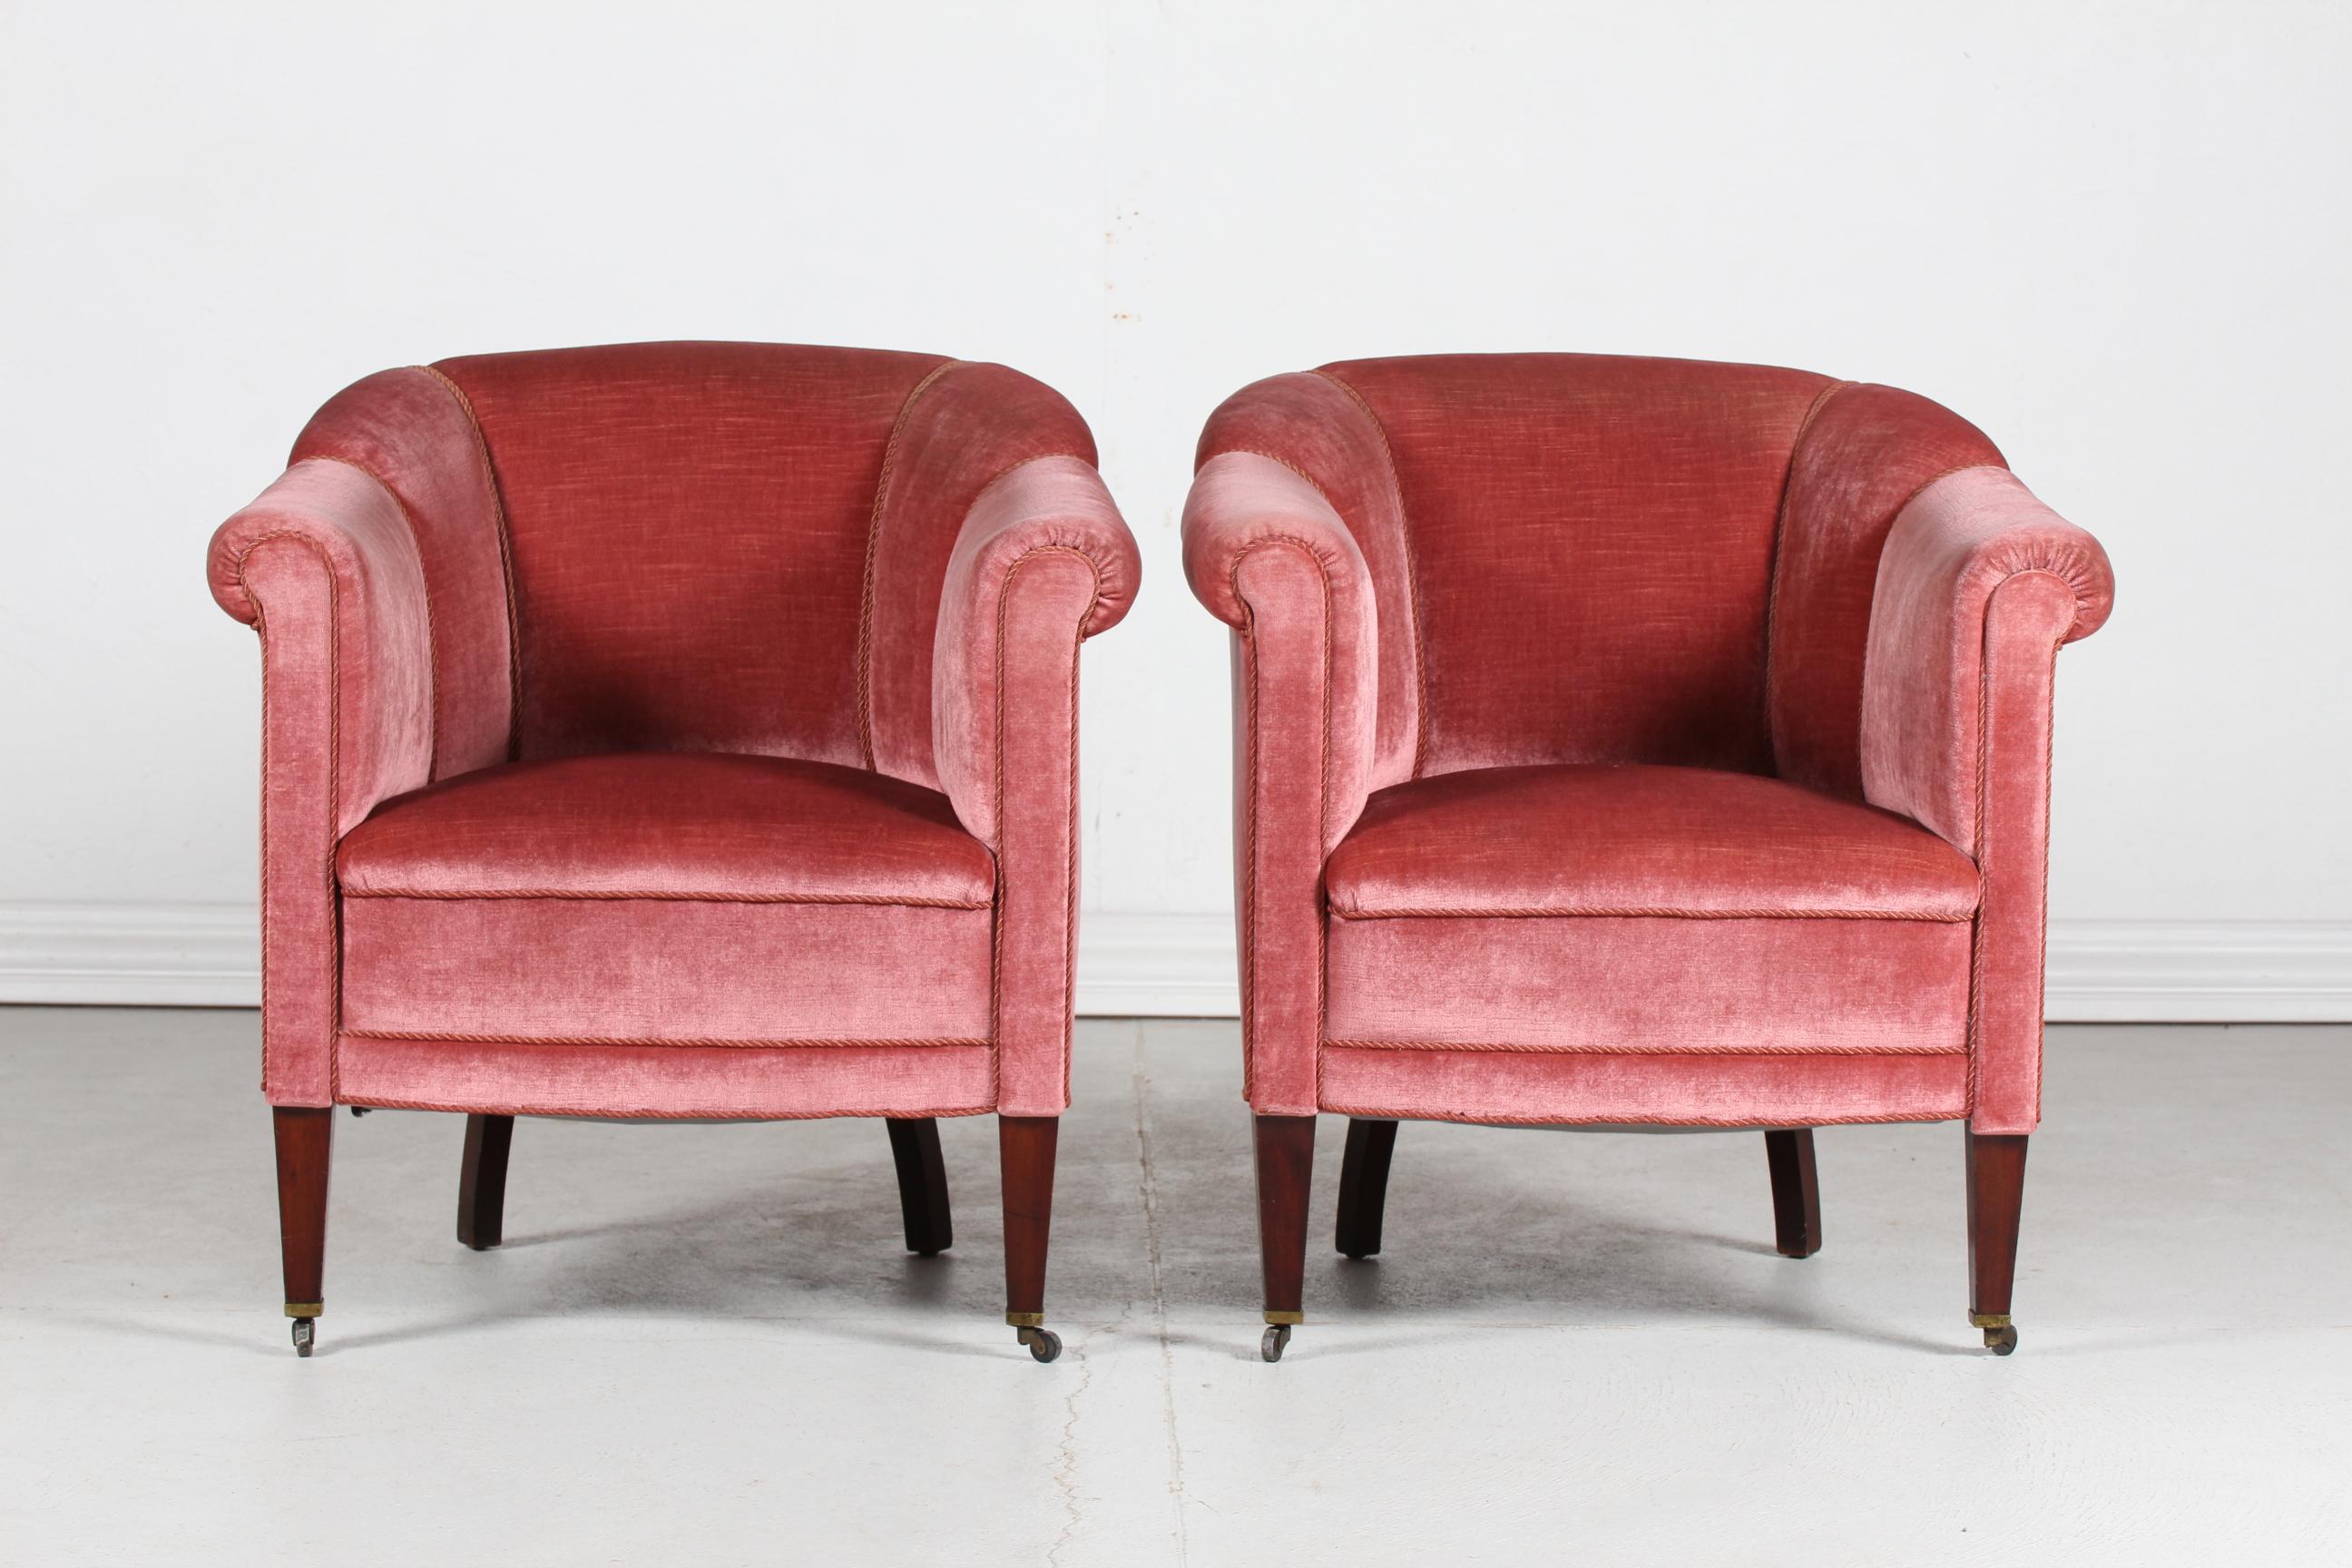 Pair of vintage u-shaped Chesterfield loungechairs made by a danish cabinet maker in Denmark the 1920s.
They are upholstered with dusty cherry or pink velvet. The legs are made of dark mahogany anf the front legs are fitted with small brass